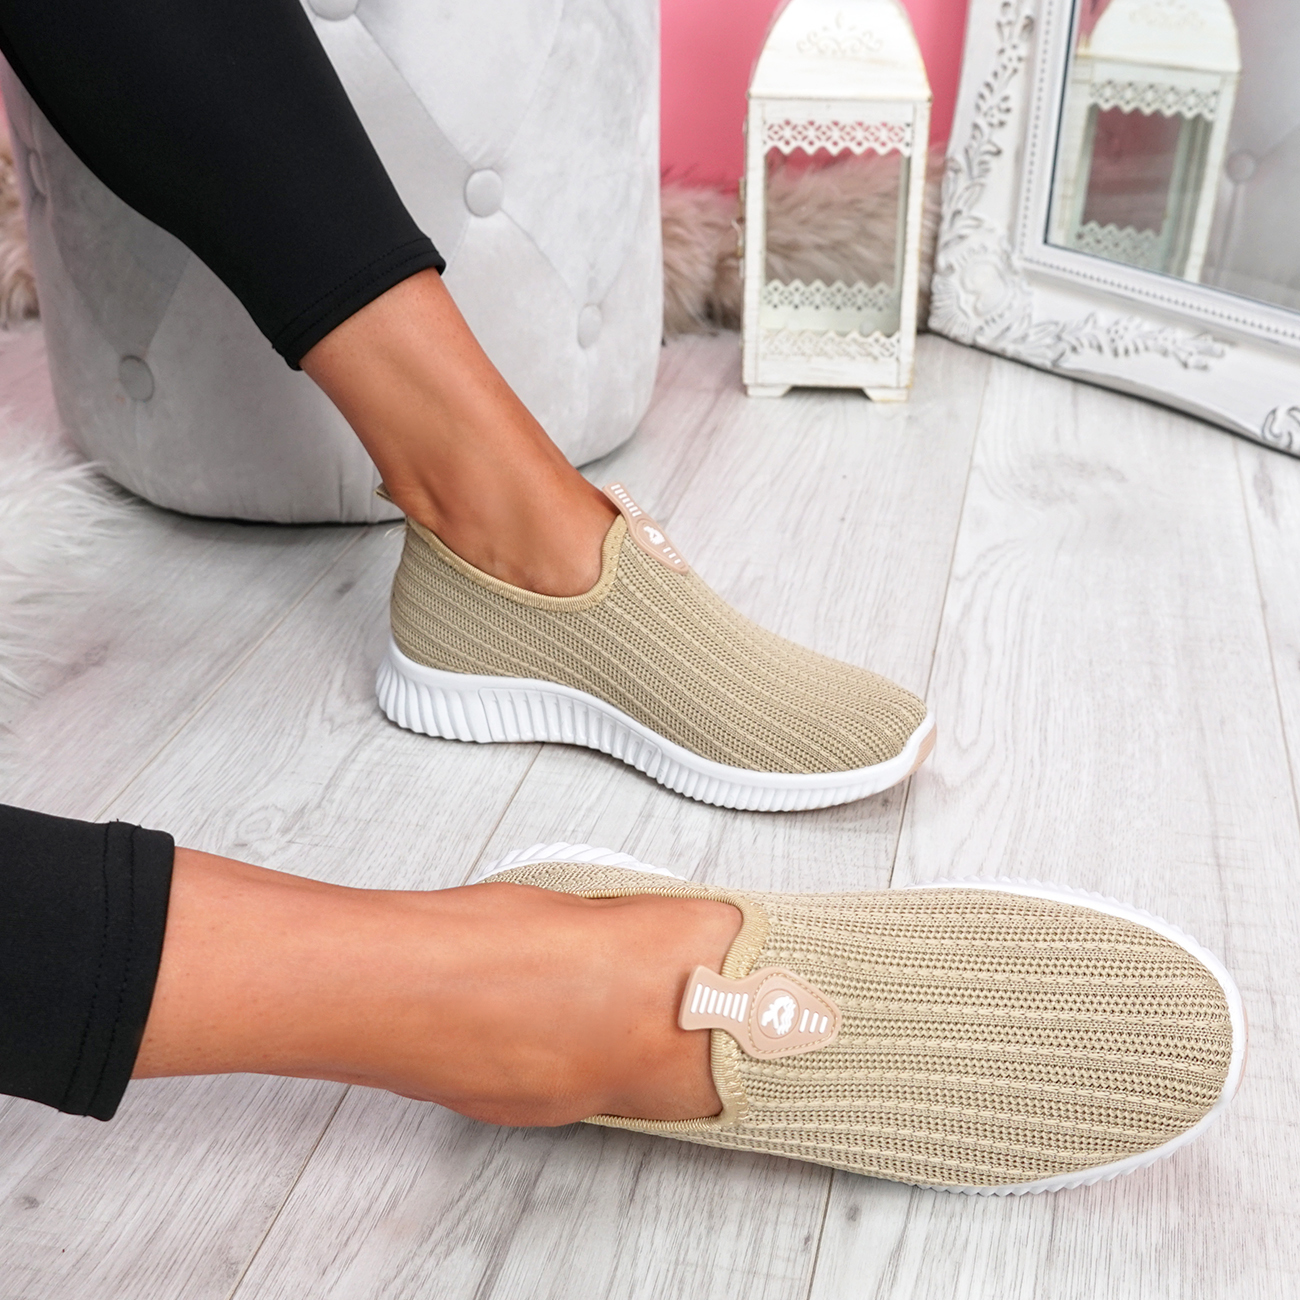 WOMENS LADIES SLIP ON KNIT TRAINERS PARTY CASUAL SPORT SNEAKERS WOMEN ...